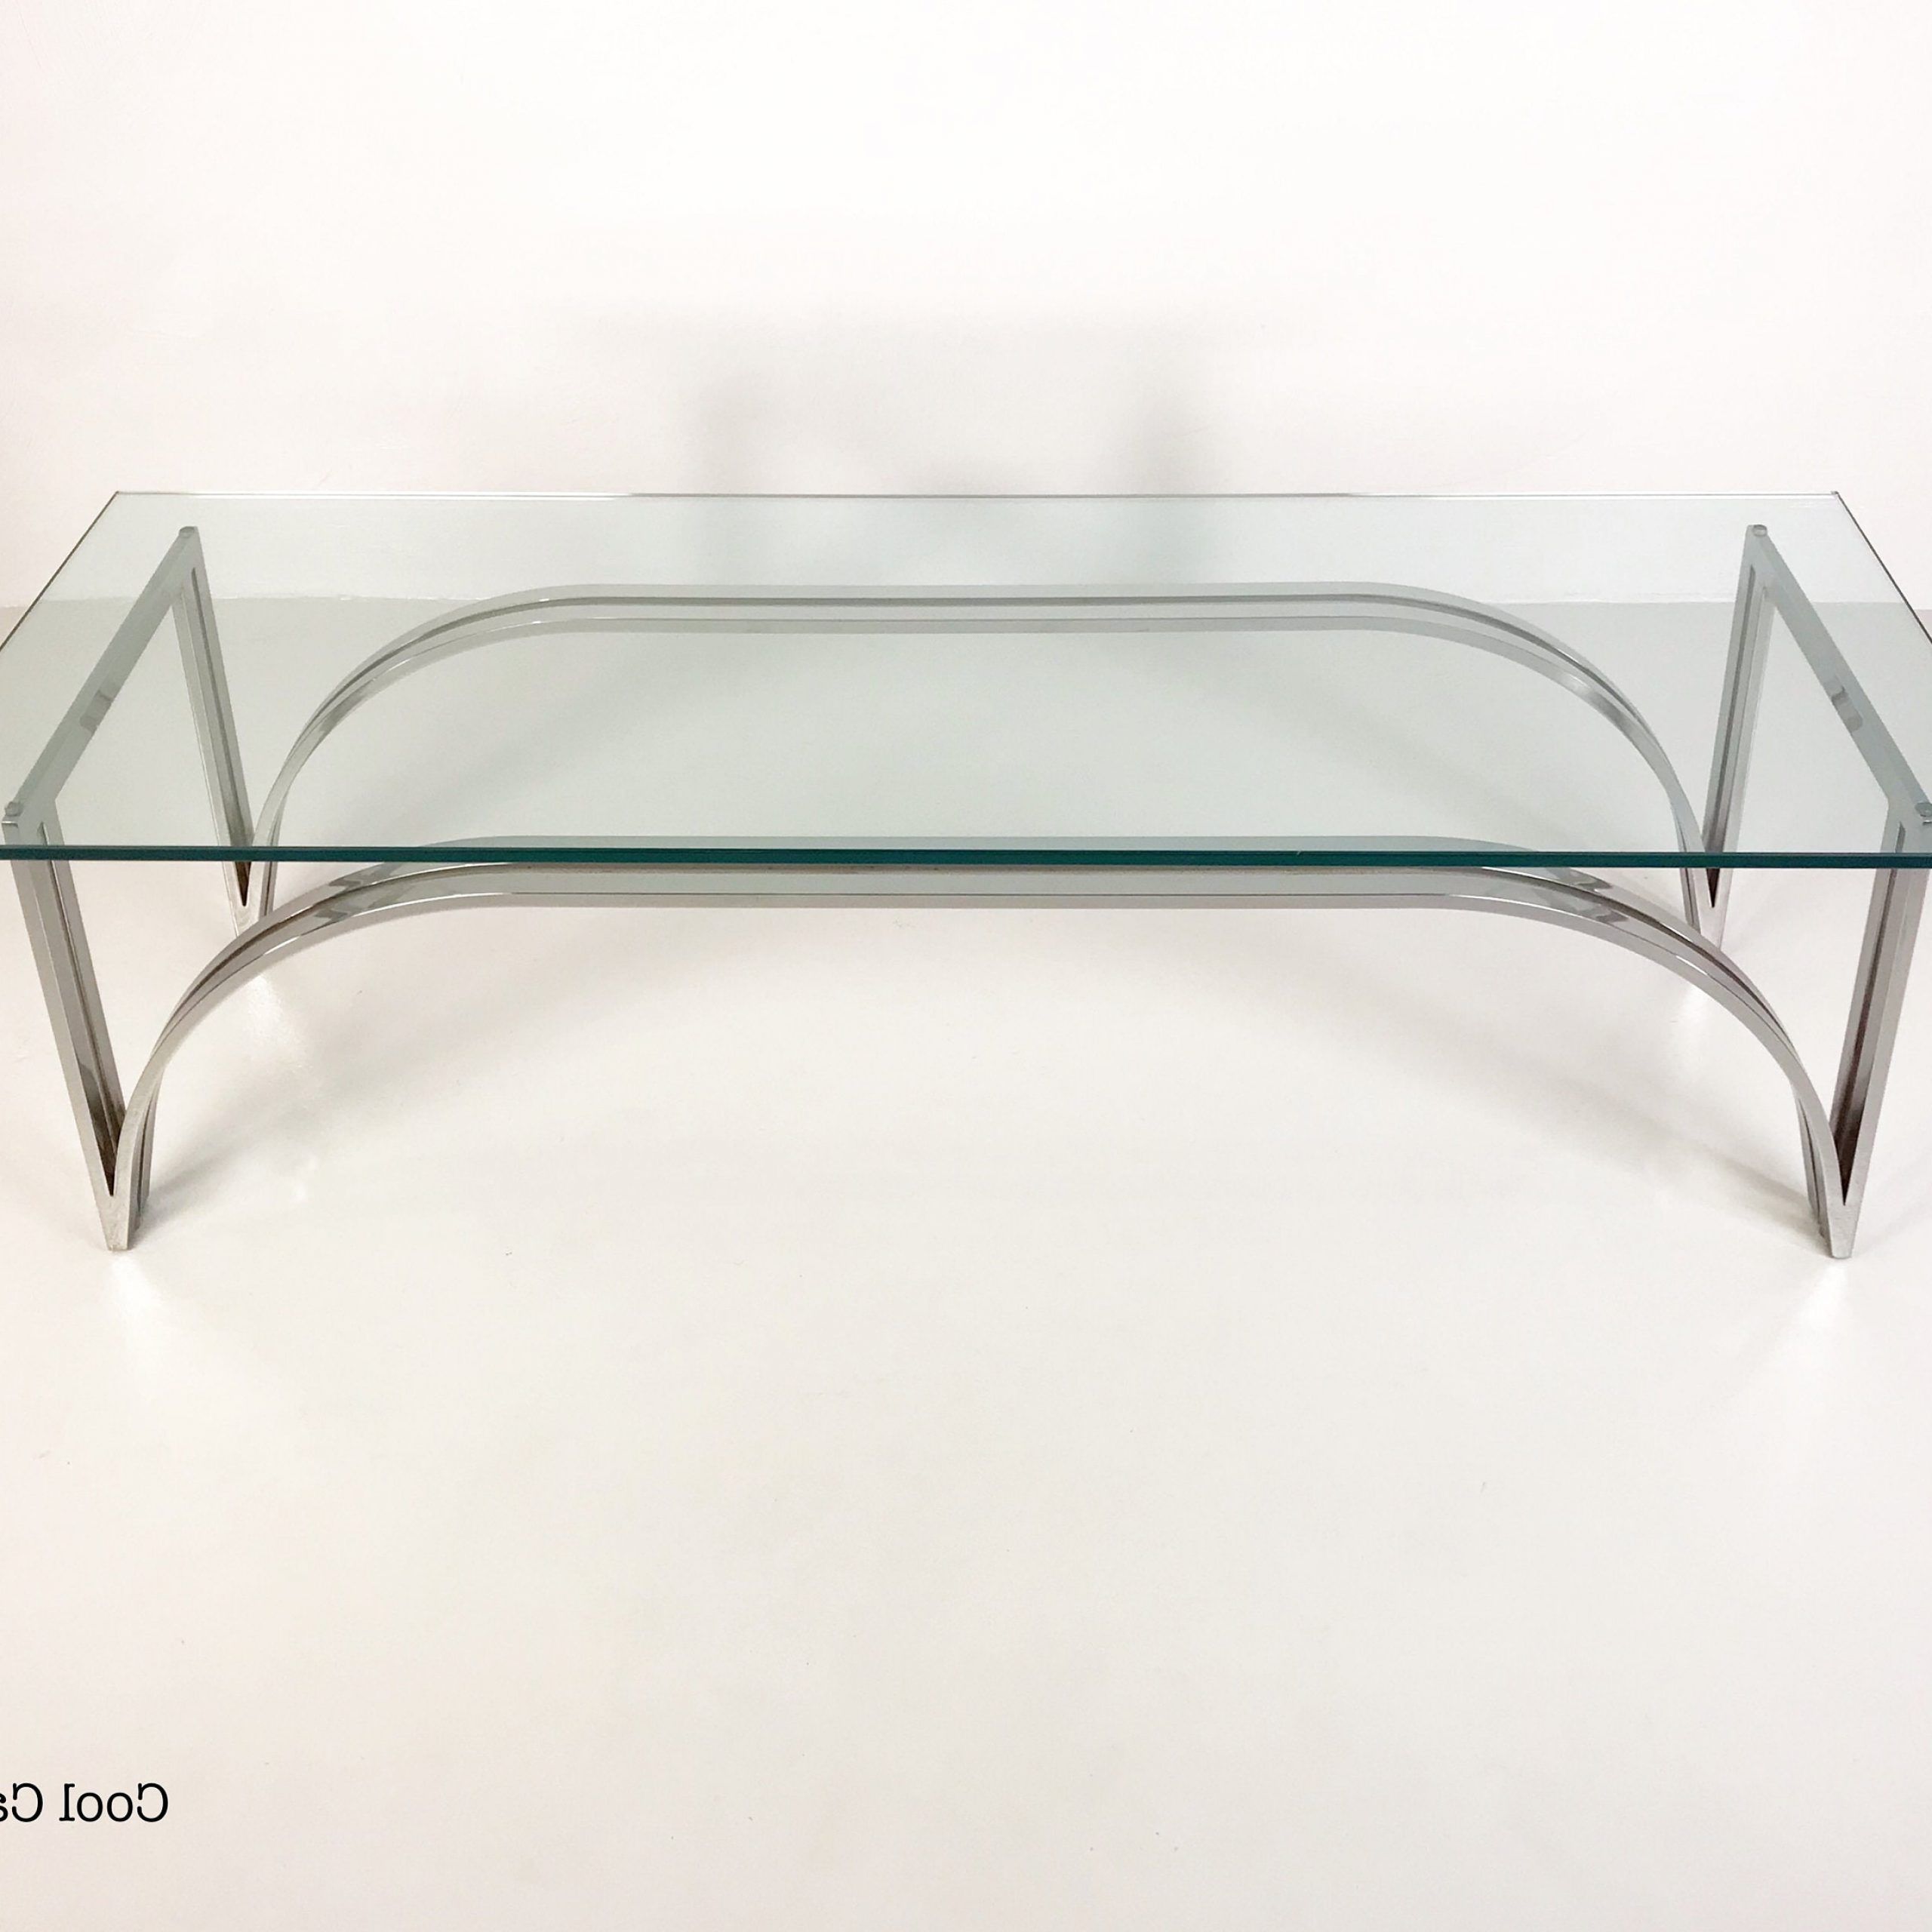 Modern Rectangular Chrome Glass Top Coffee Table, Circa For Most Current Chrome And Glass Rectangular Coffee Tables (View 3 of 20)